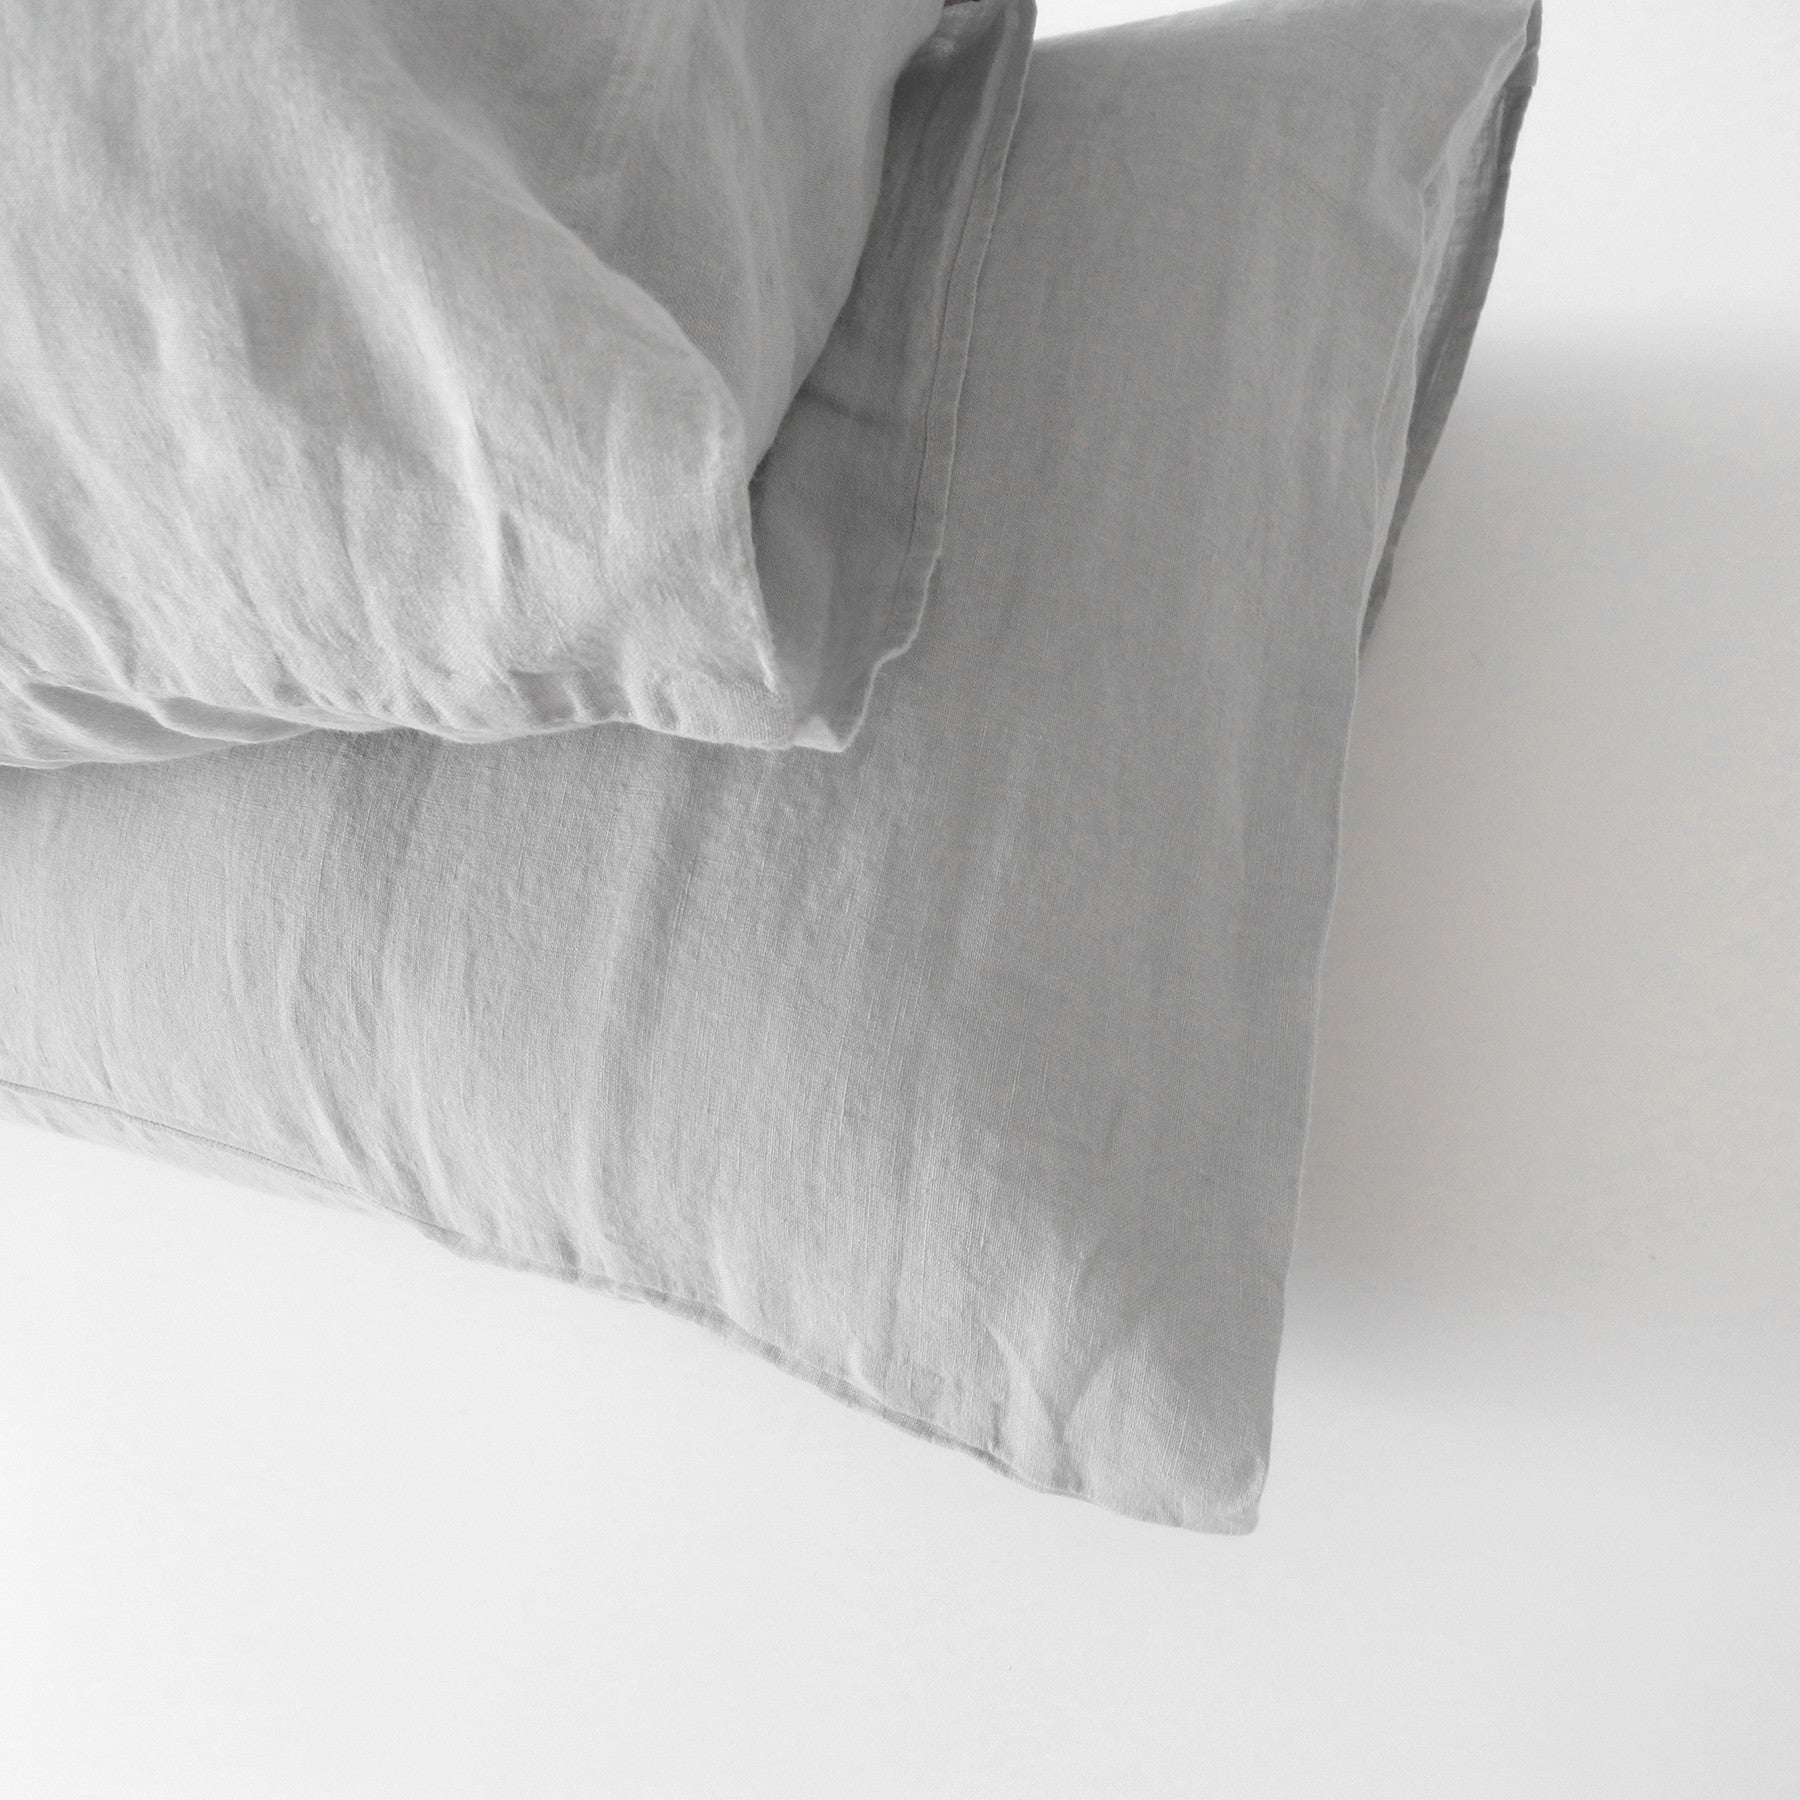 Linge Particulier Cloud Grey Standard Linen Pillowcase Sham for a colorful linen bedding look in light grey - Collyer's Mansion